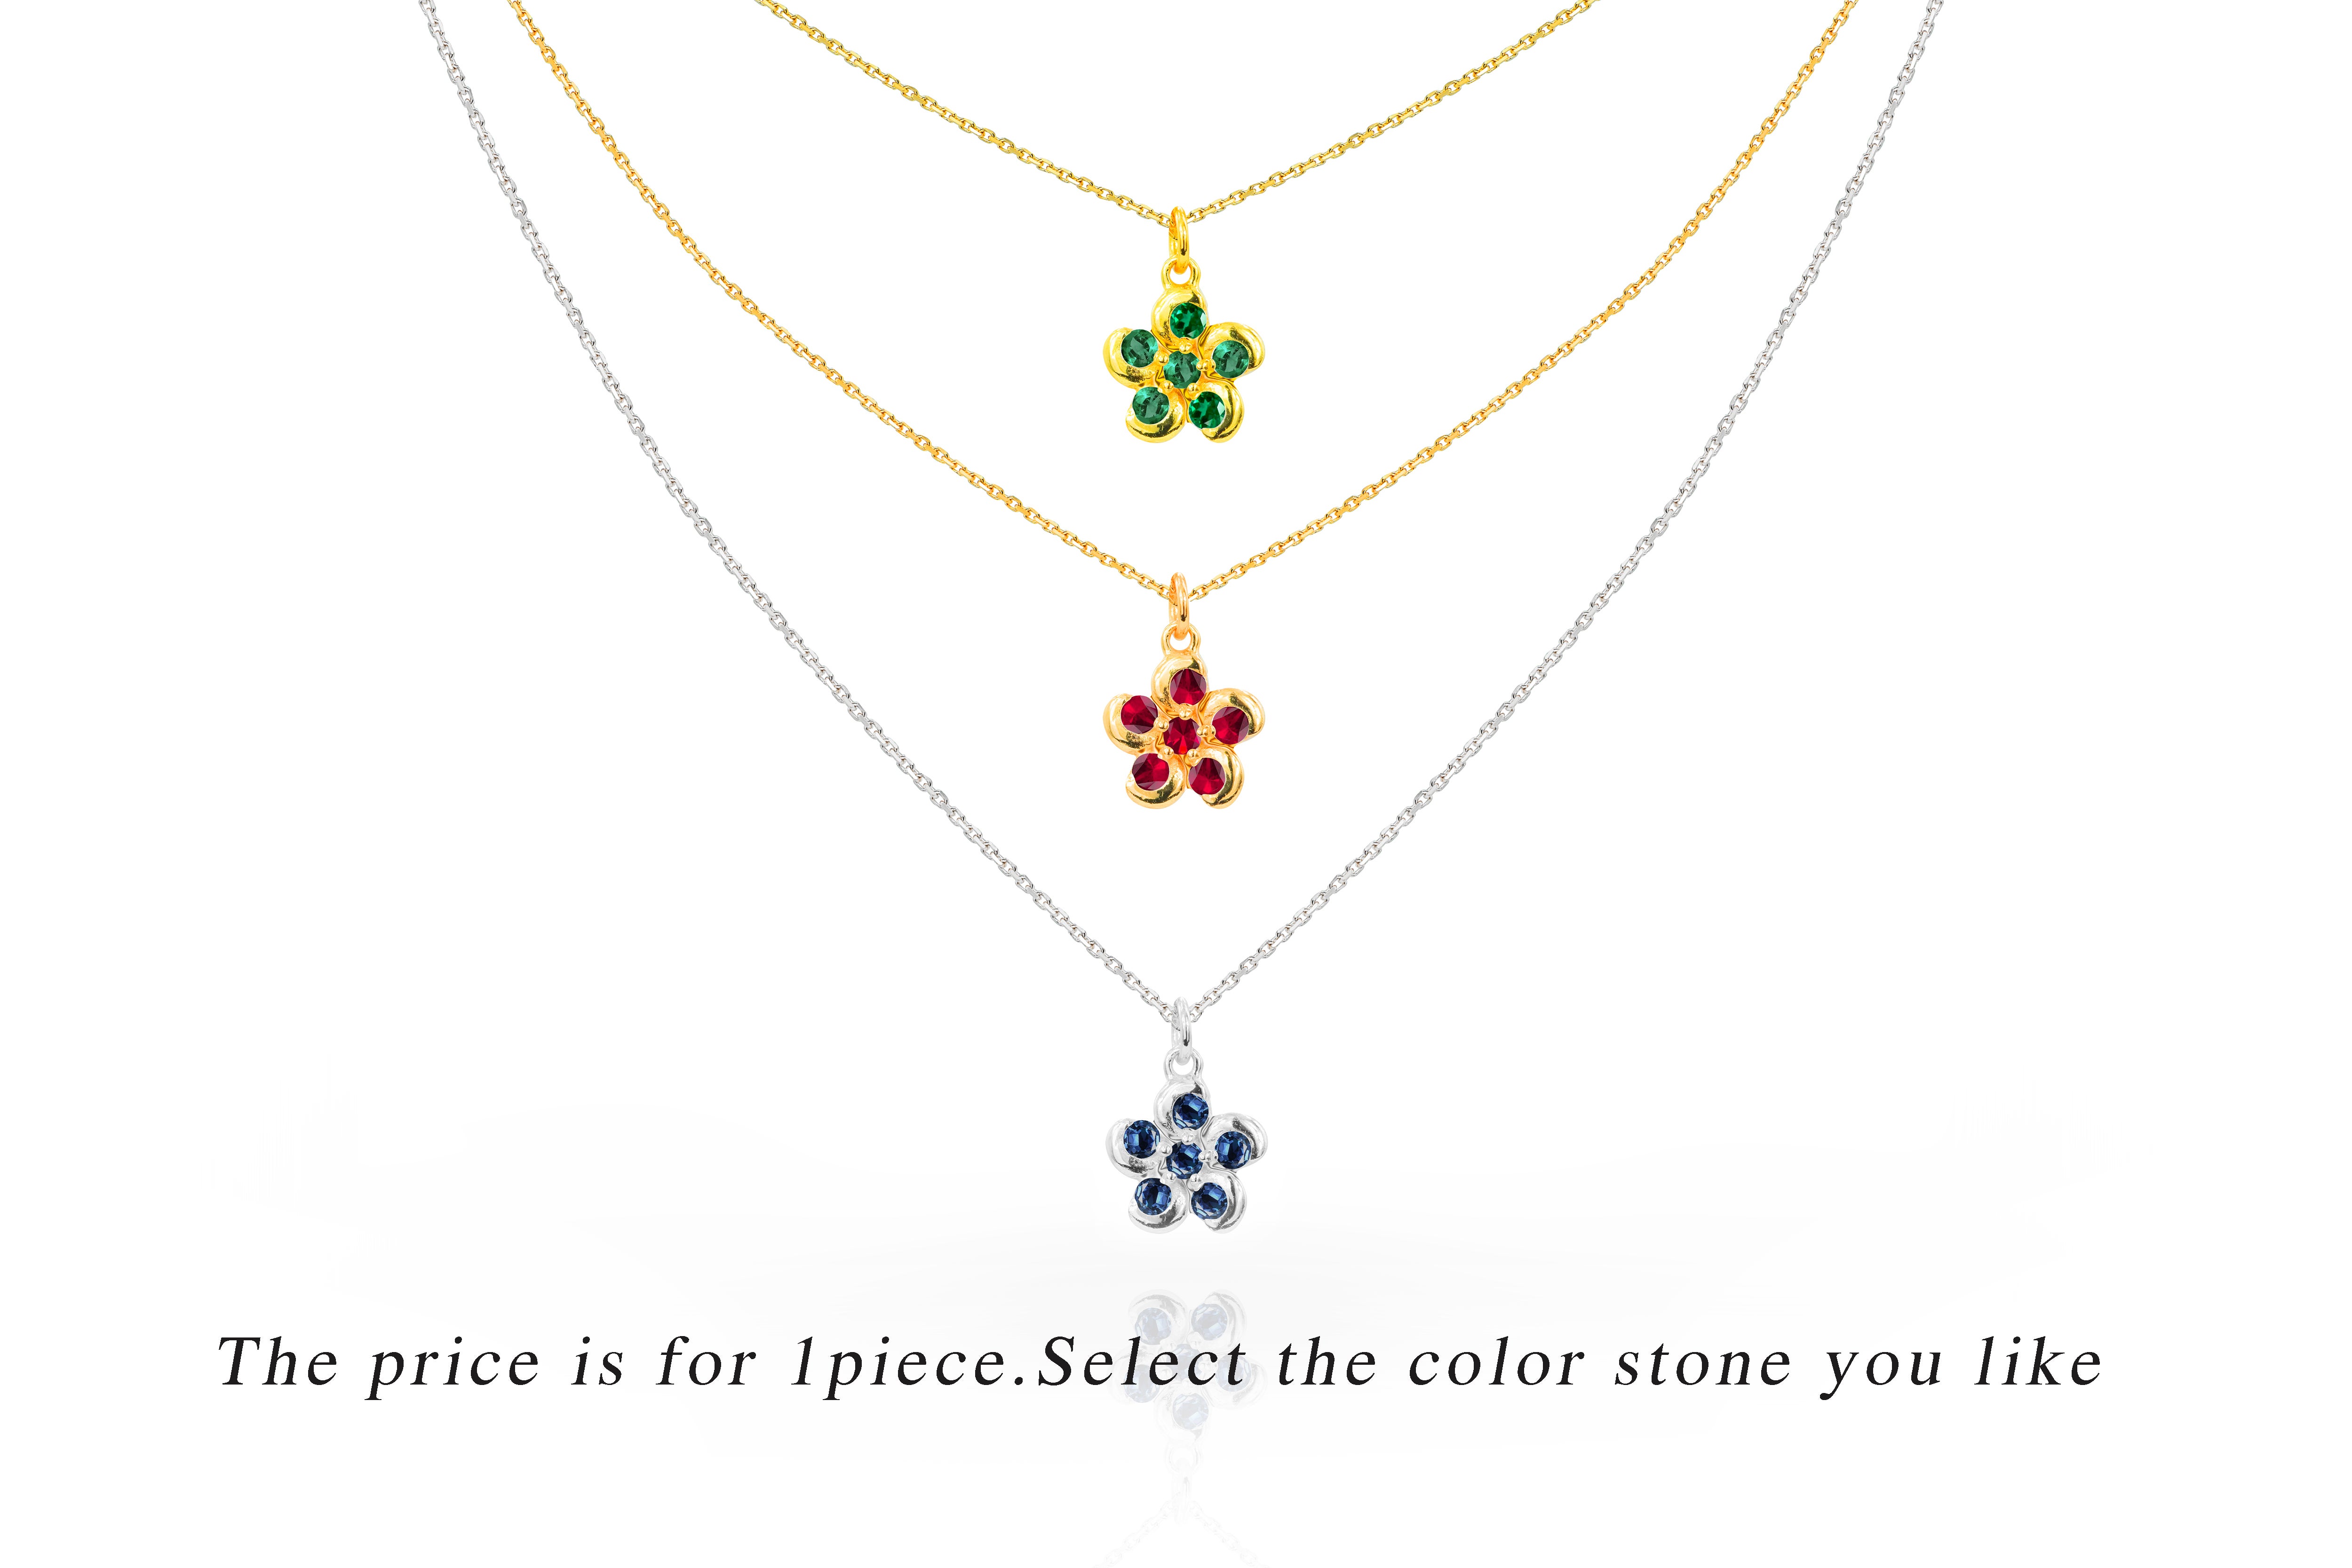 0.24 Ct Ruby, Sapphire and Emerald Flower Necklace in 18K Gold For Sale